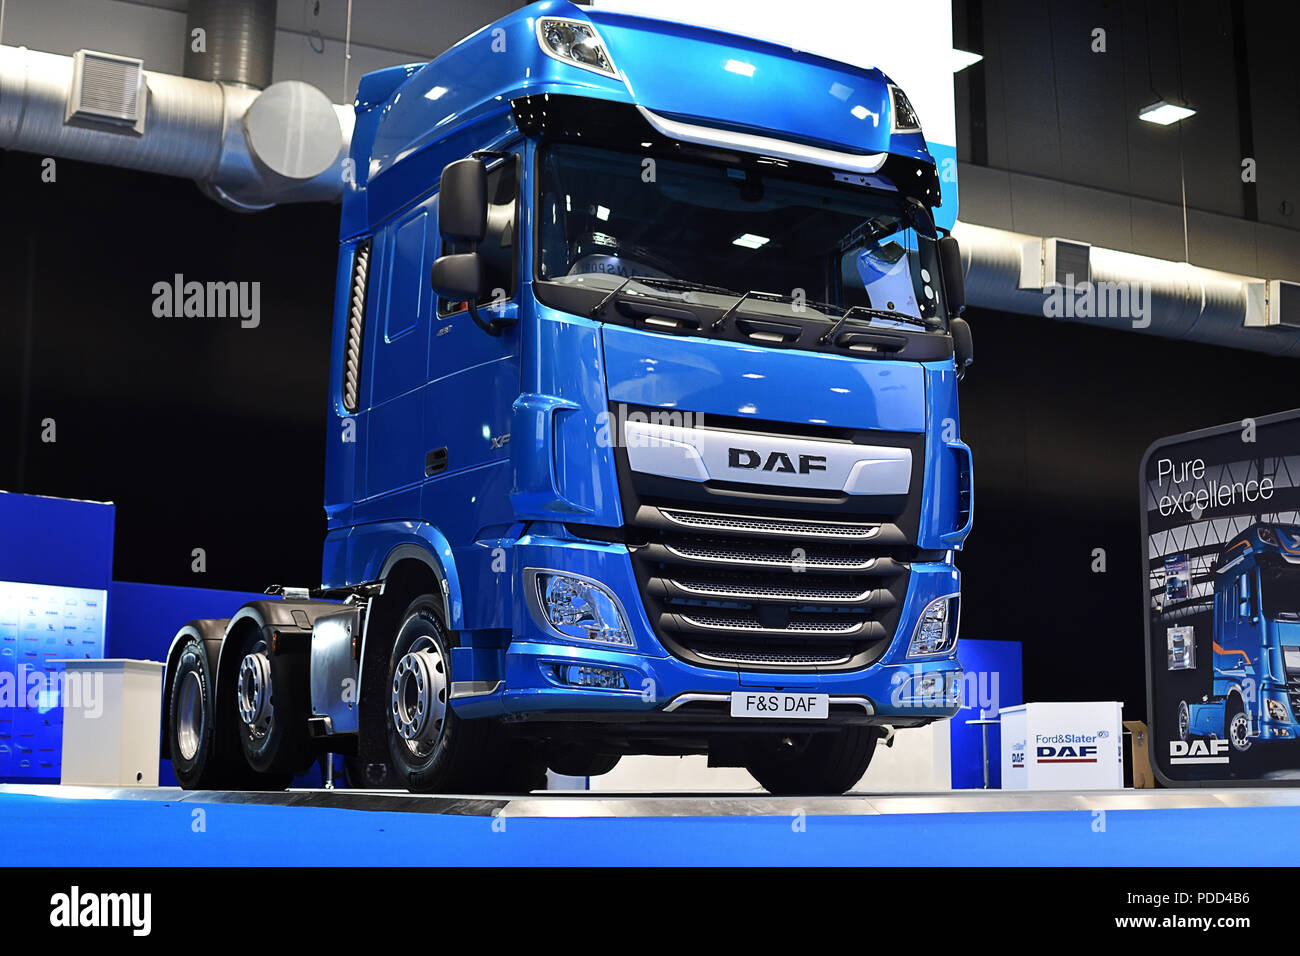 https://c8.alamy.com/comp/PDD4B6/daf-truck-on-display-at-the-commercial-vehicle-show-nec-PDD4B6.jpg